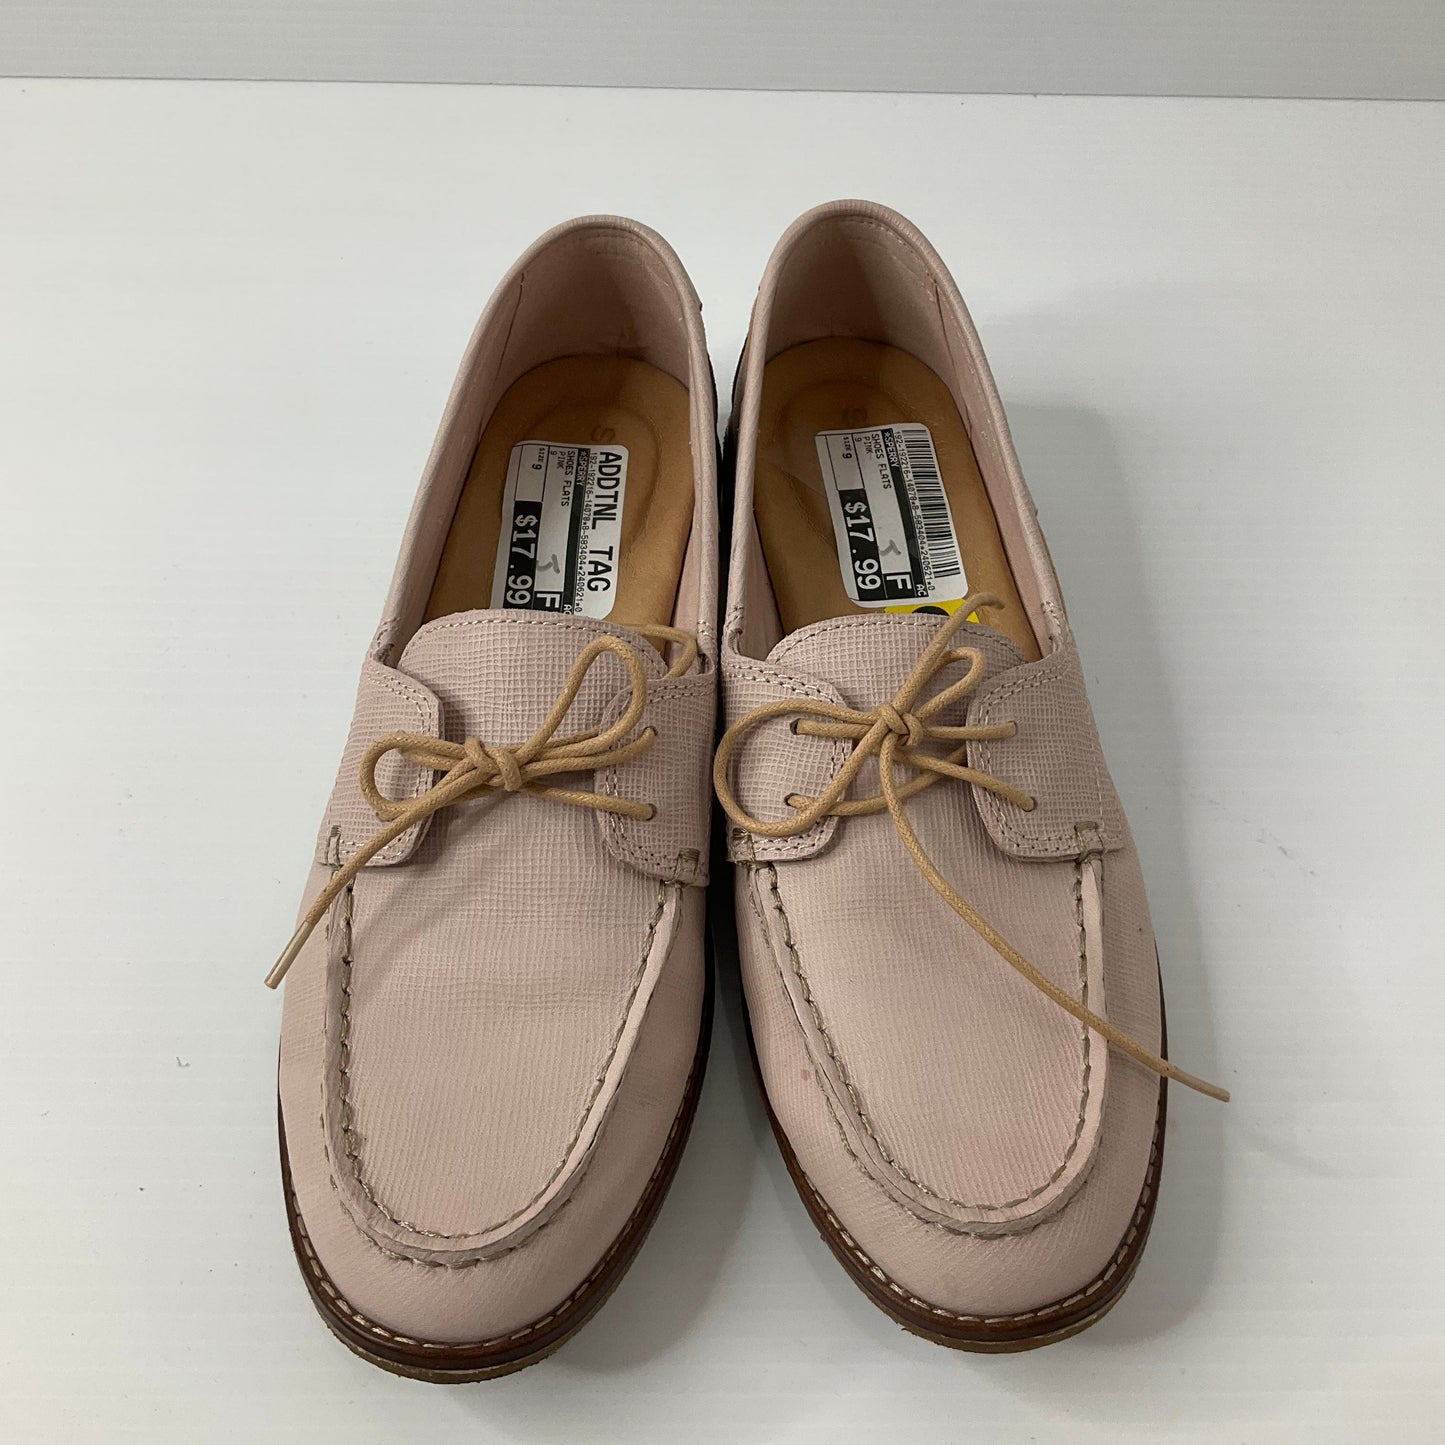 Pink Shoes Flats Sperry, Size 9